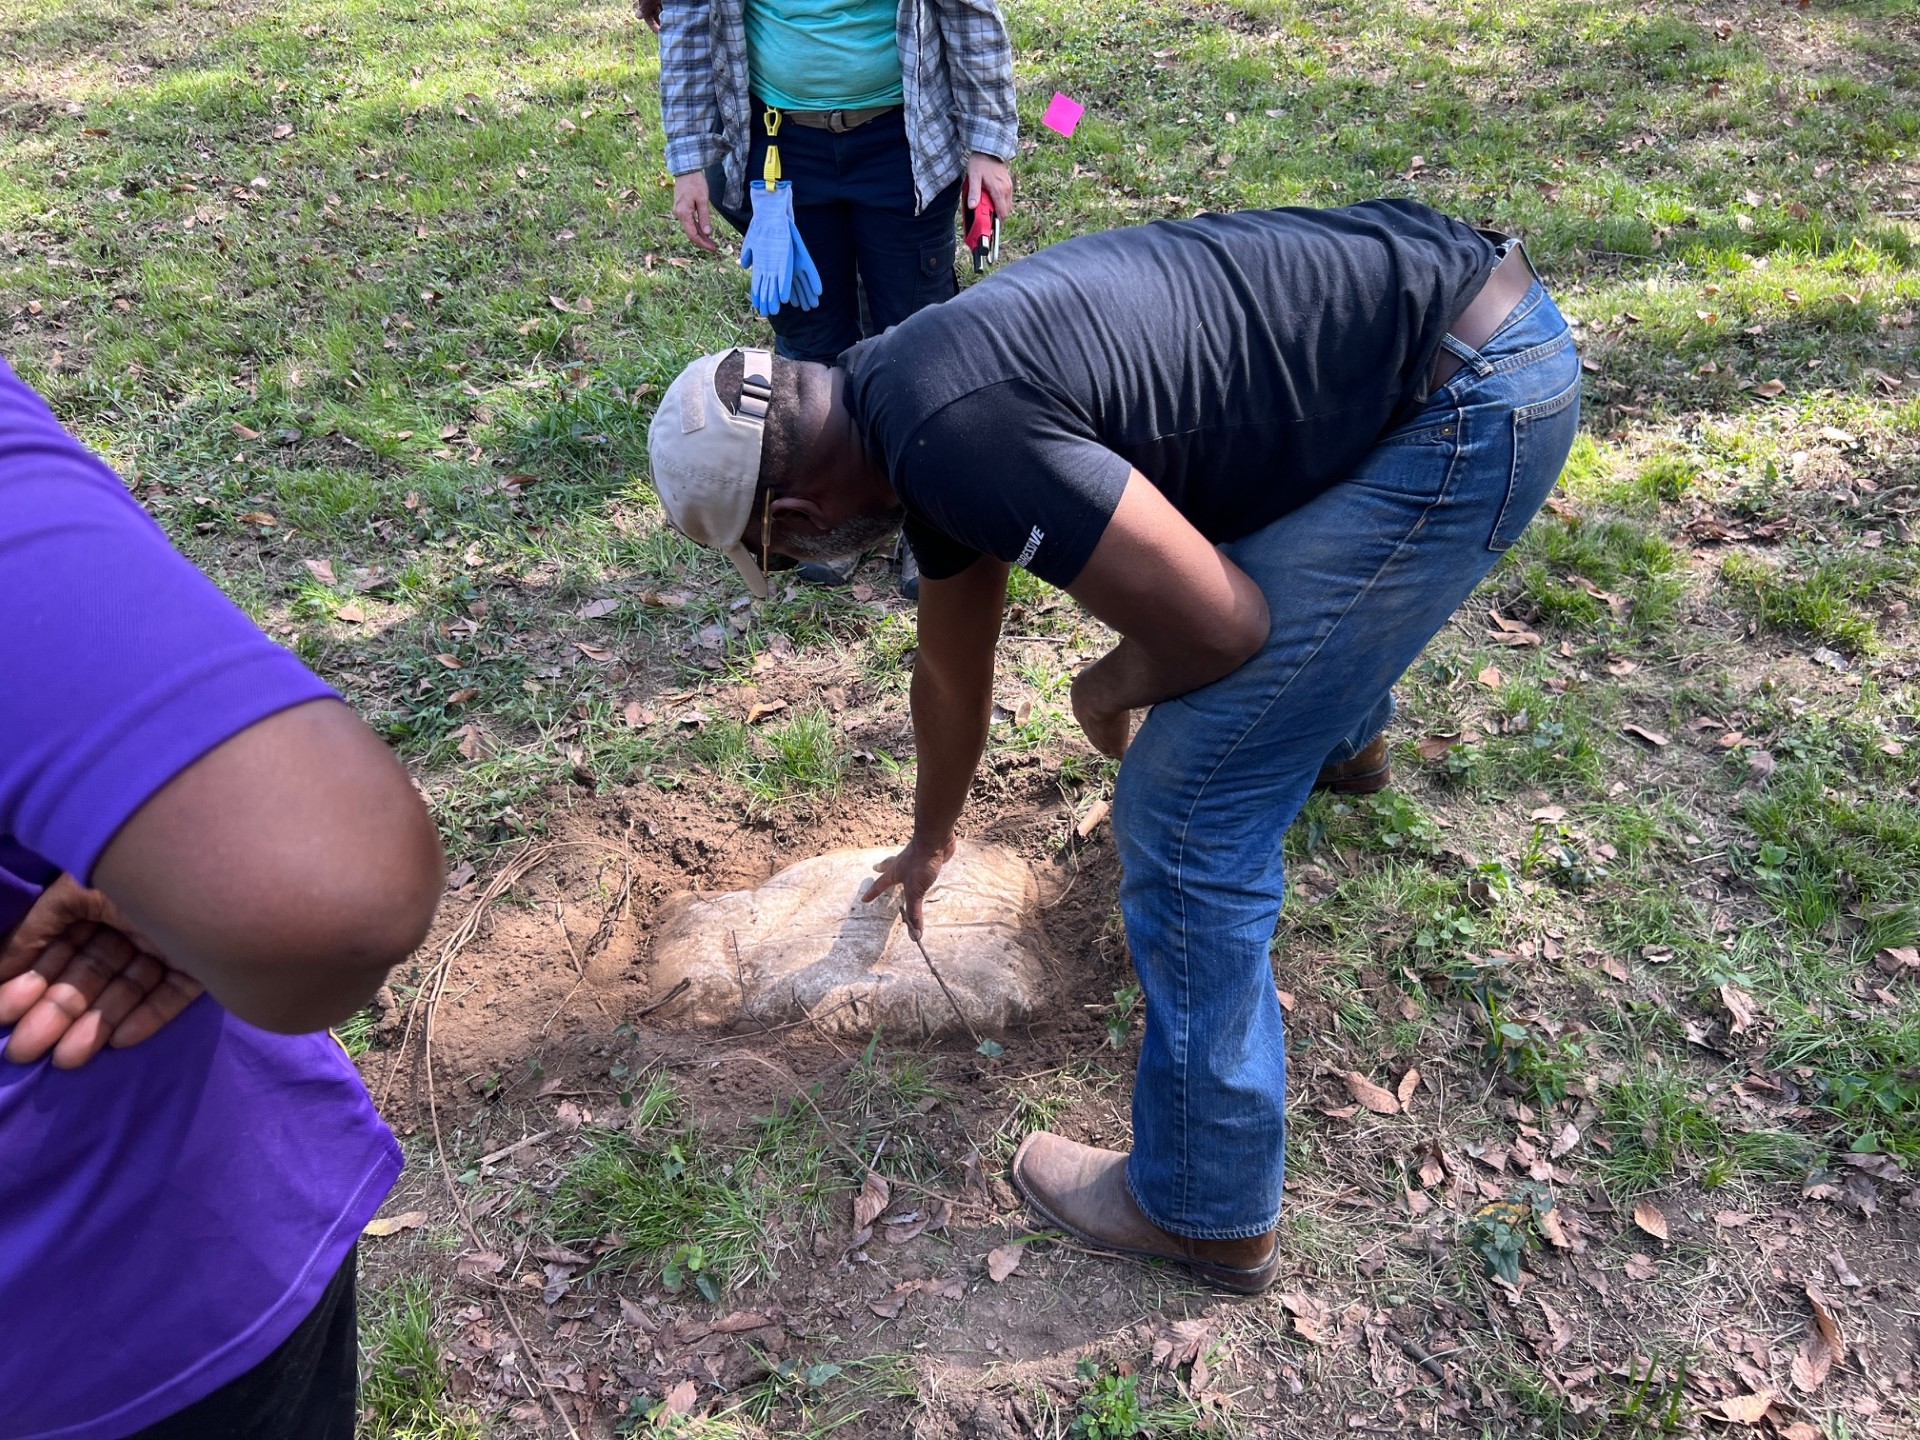 Gregory Newton leans over to examine one of the many field stones uncovered in the cemetery [Photo © T. DeWayne Moore, 2023]